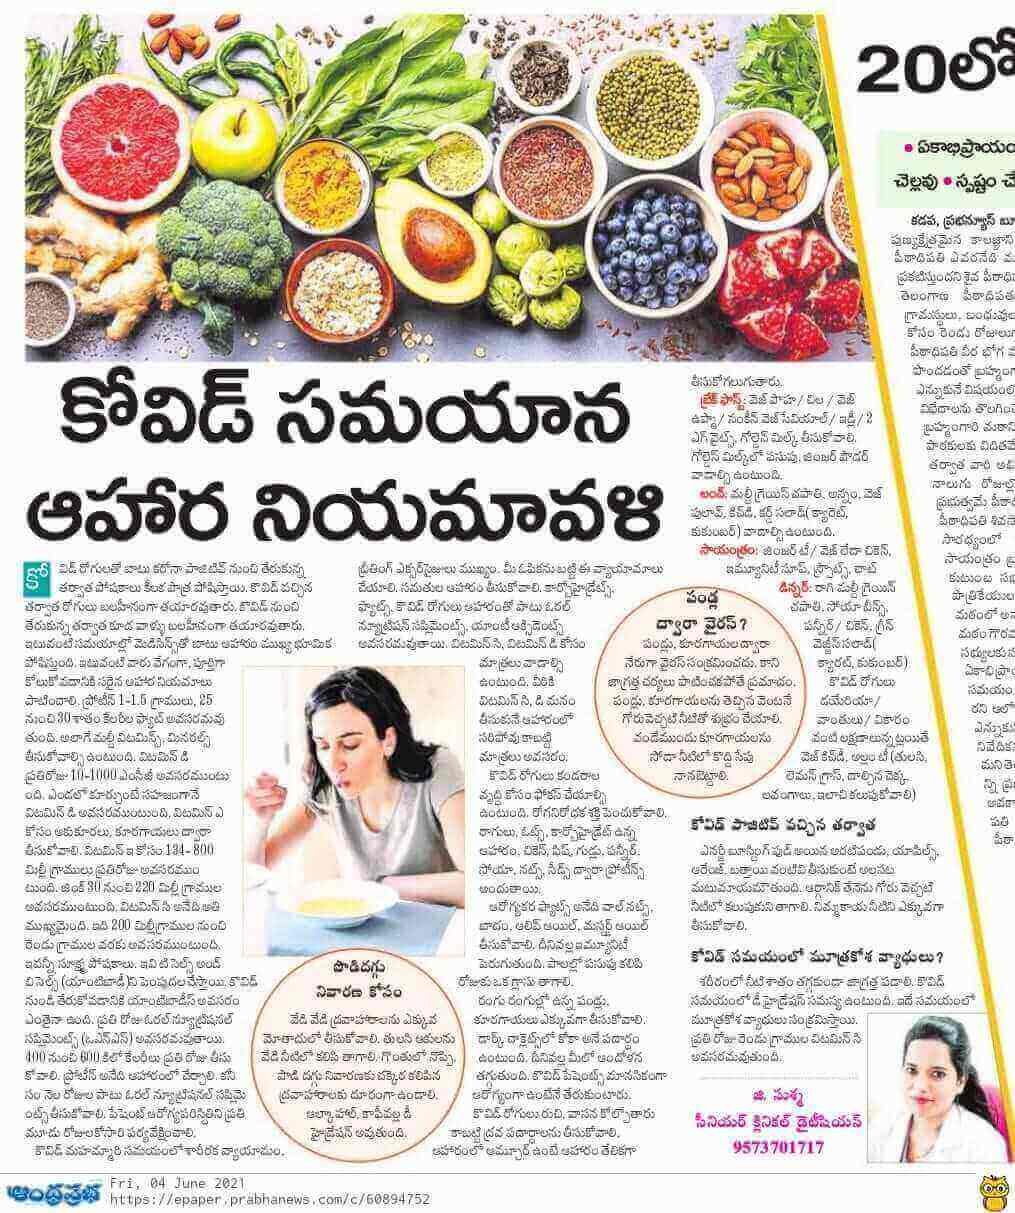 Article on COVID Diet by G. Sushma - Dietetics & Nutrition